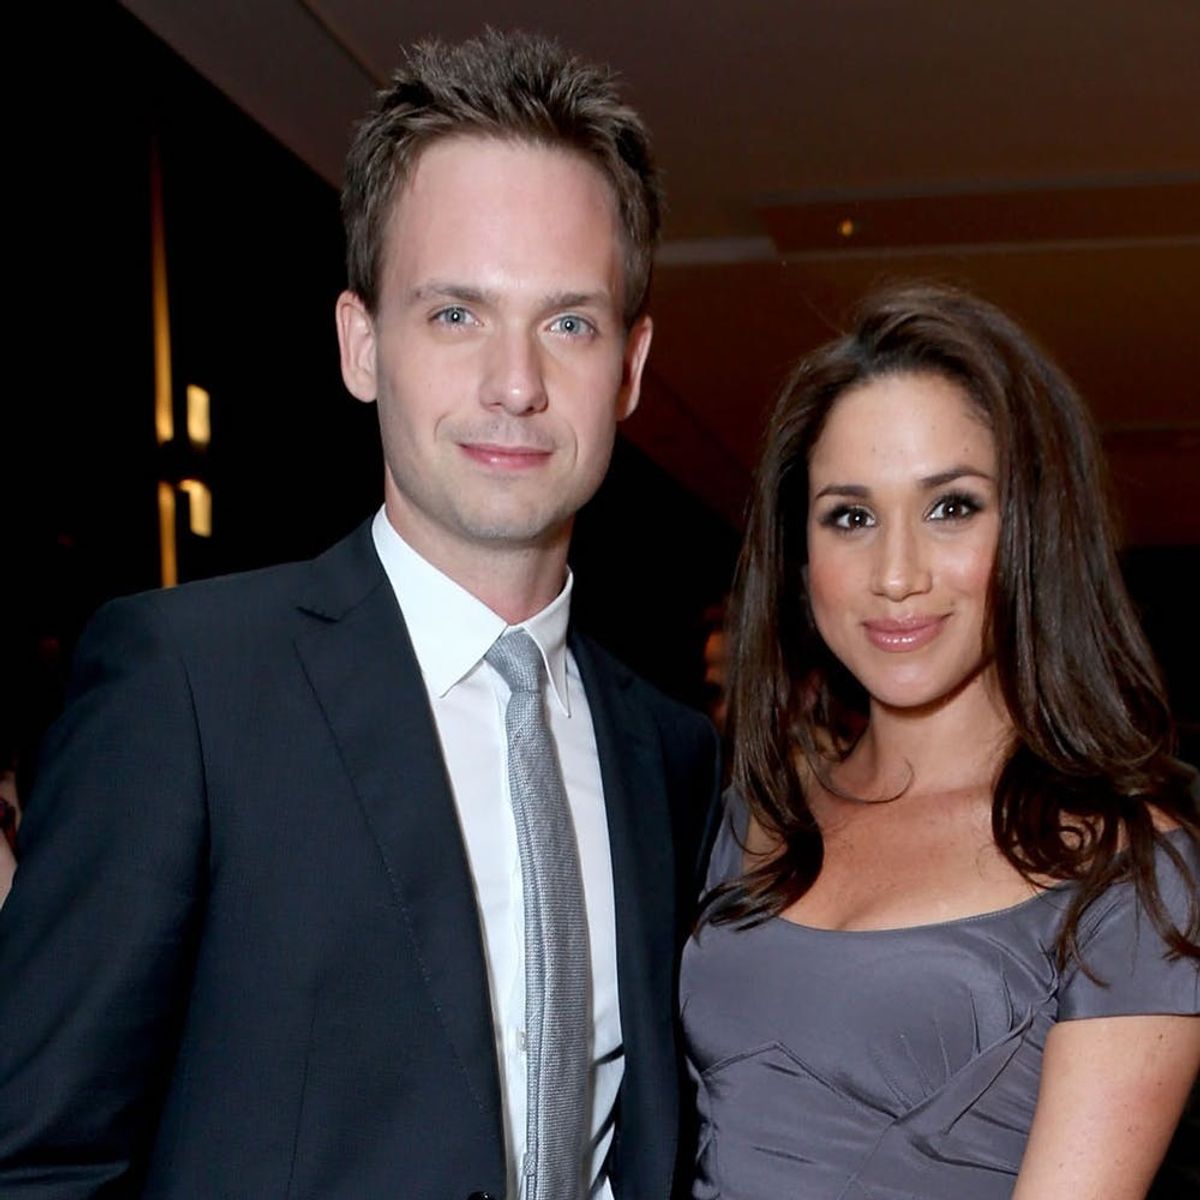 Here’s What Meghan Markle’s On-Screen Fiancé Patrick J. Adams Is Giving Her and Prince Harry for Their Wedding